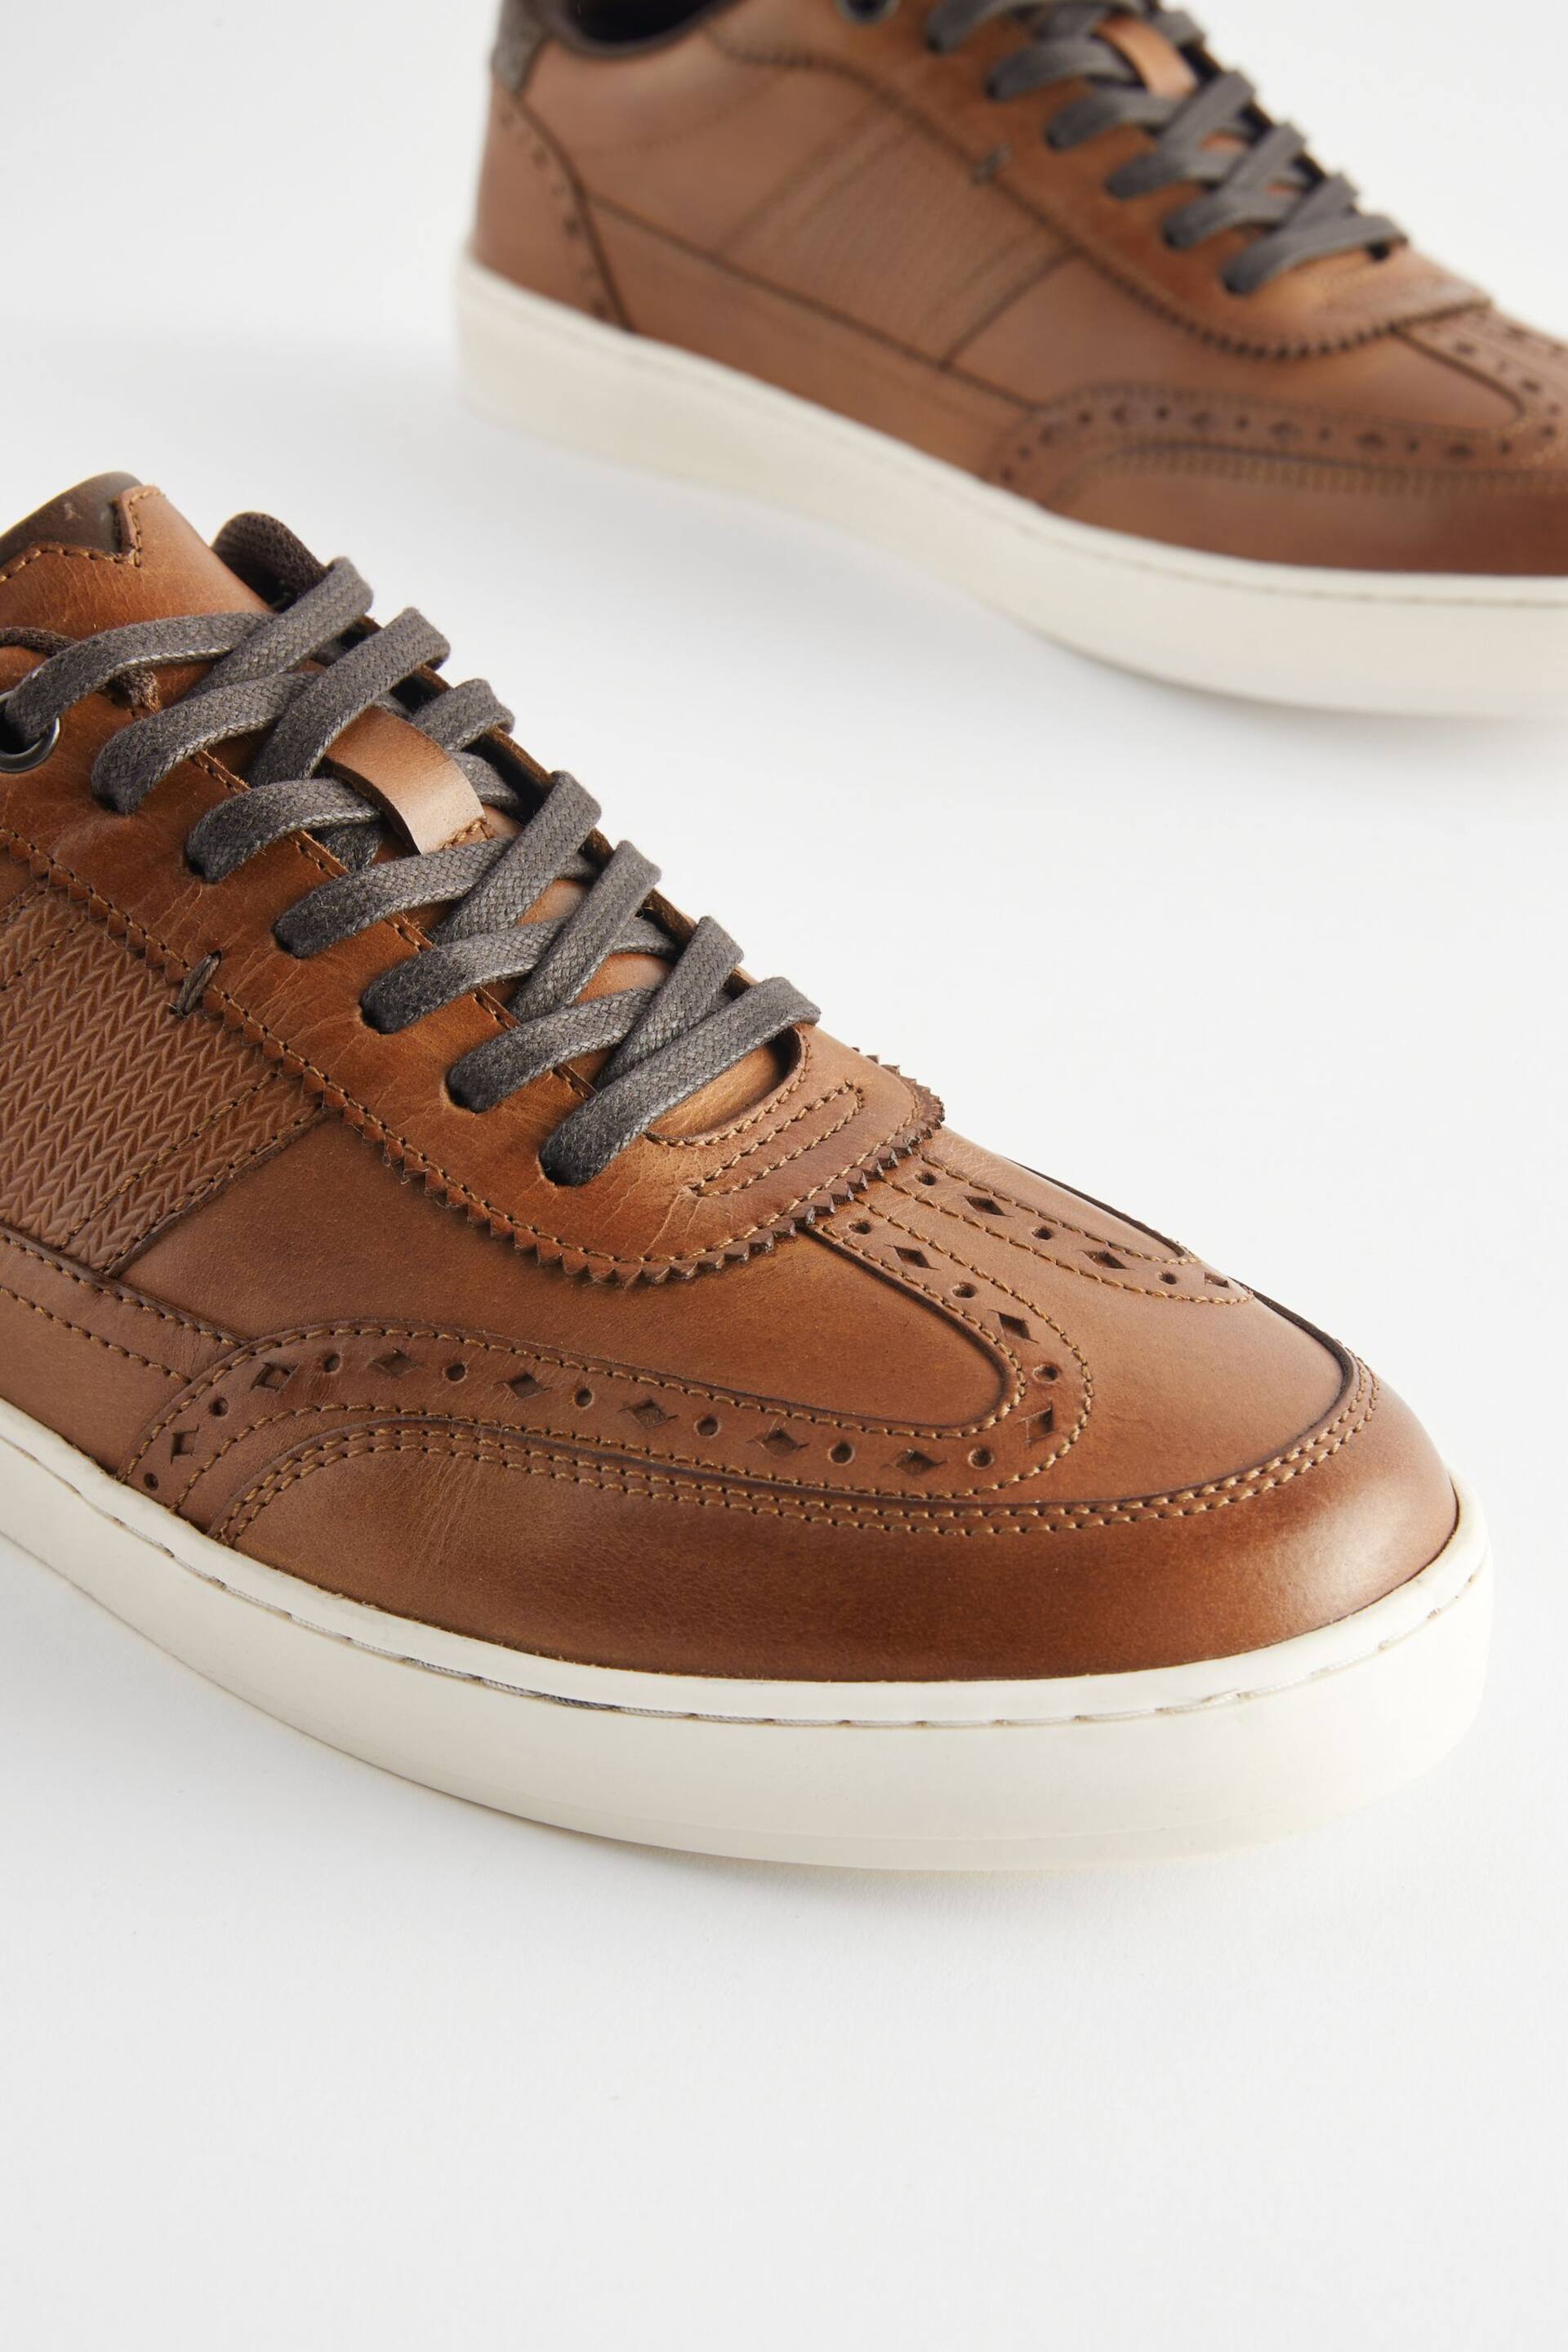 Tan Brown Leather Brogue Trainers - Image 3 of 5